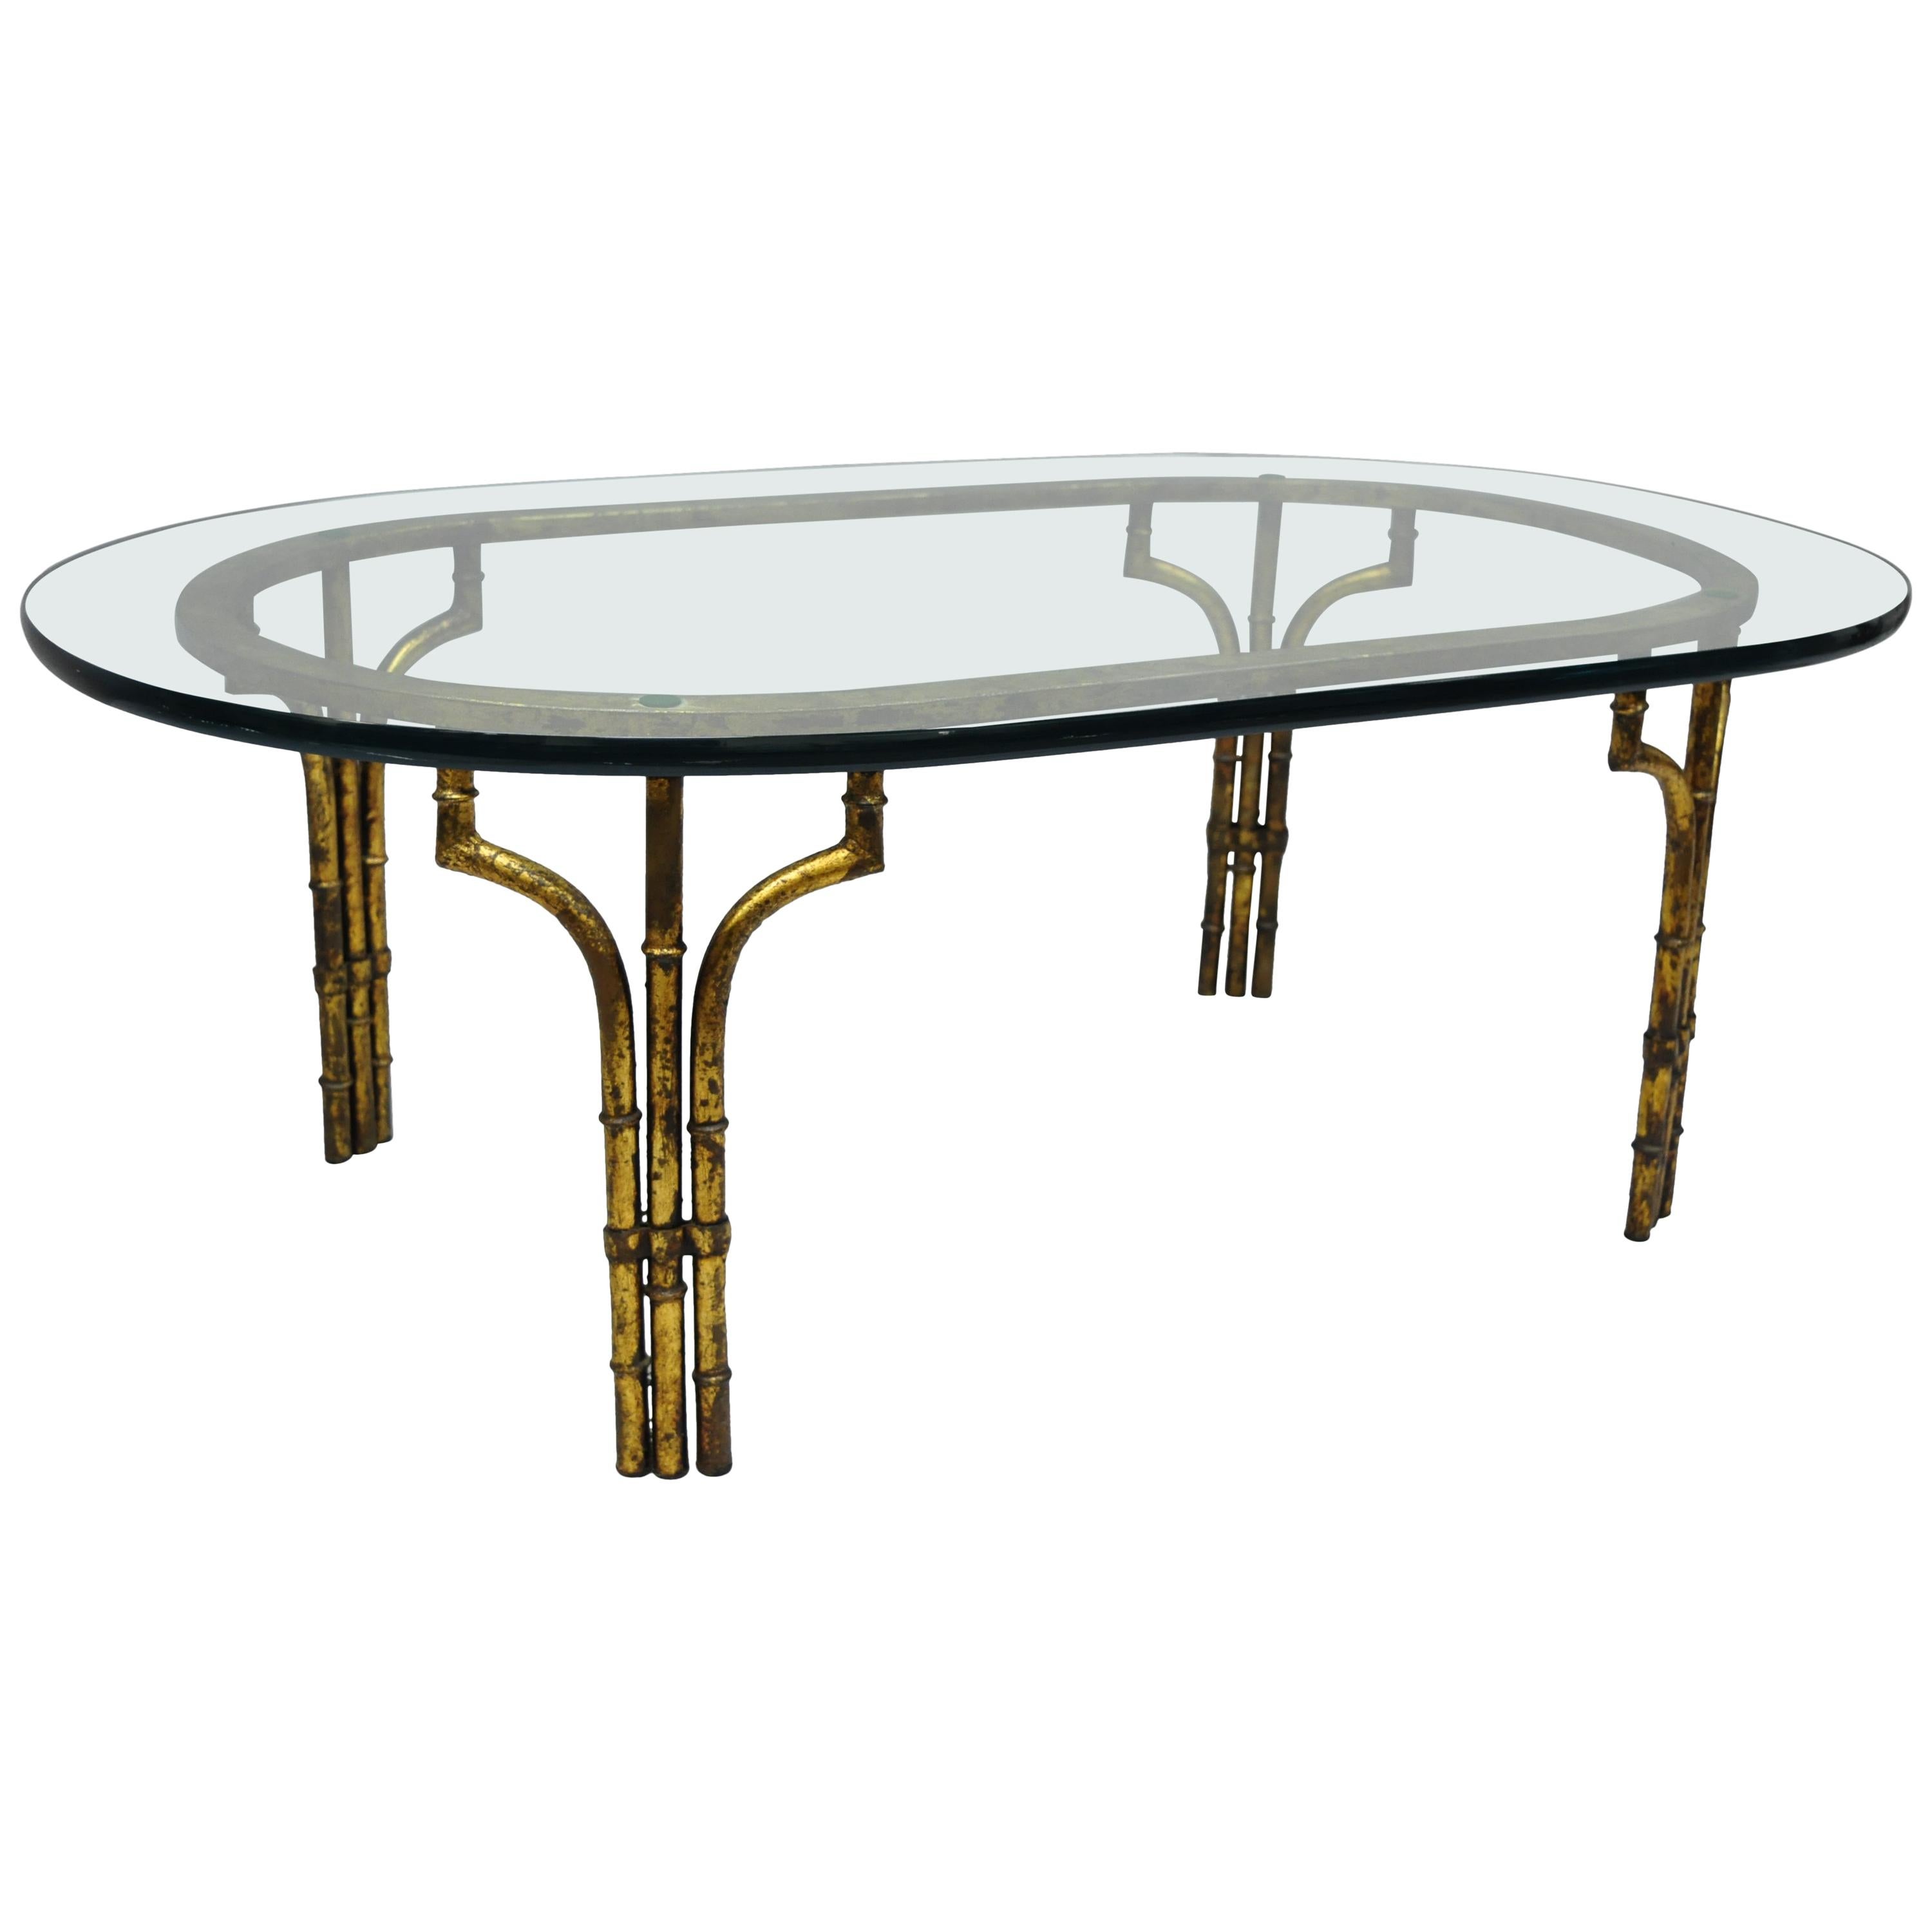 Italian Hollywood Regency Faux Bamboo Gold Gilt Metal Oval Glass Coffee Table